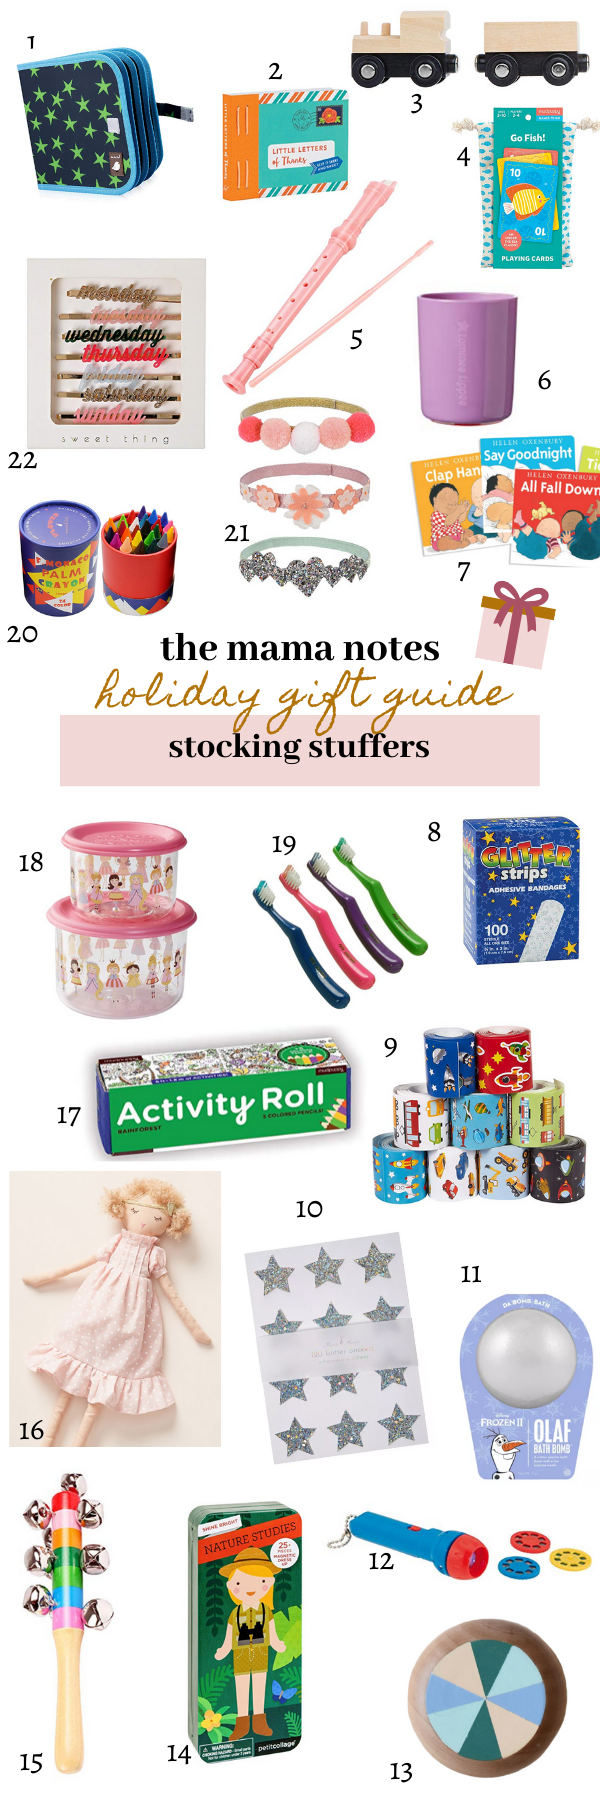 https://themamanotes.com/wp-content/uploads/2019/12/best-stocking-stuffers-for-toddlers.png